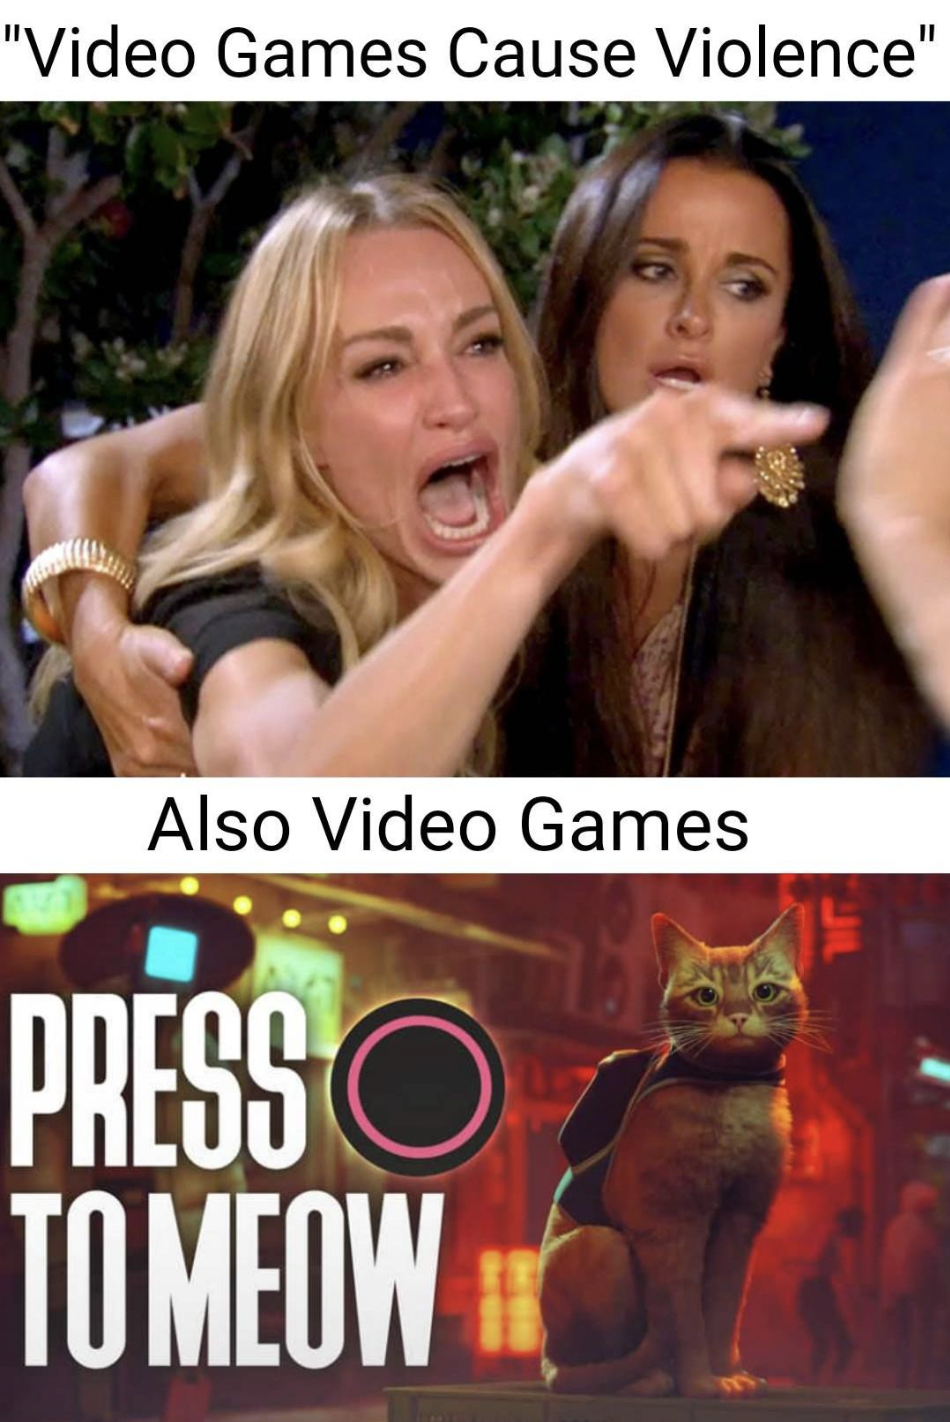 press+to+meow+violently